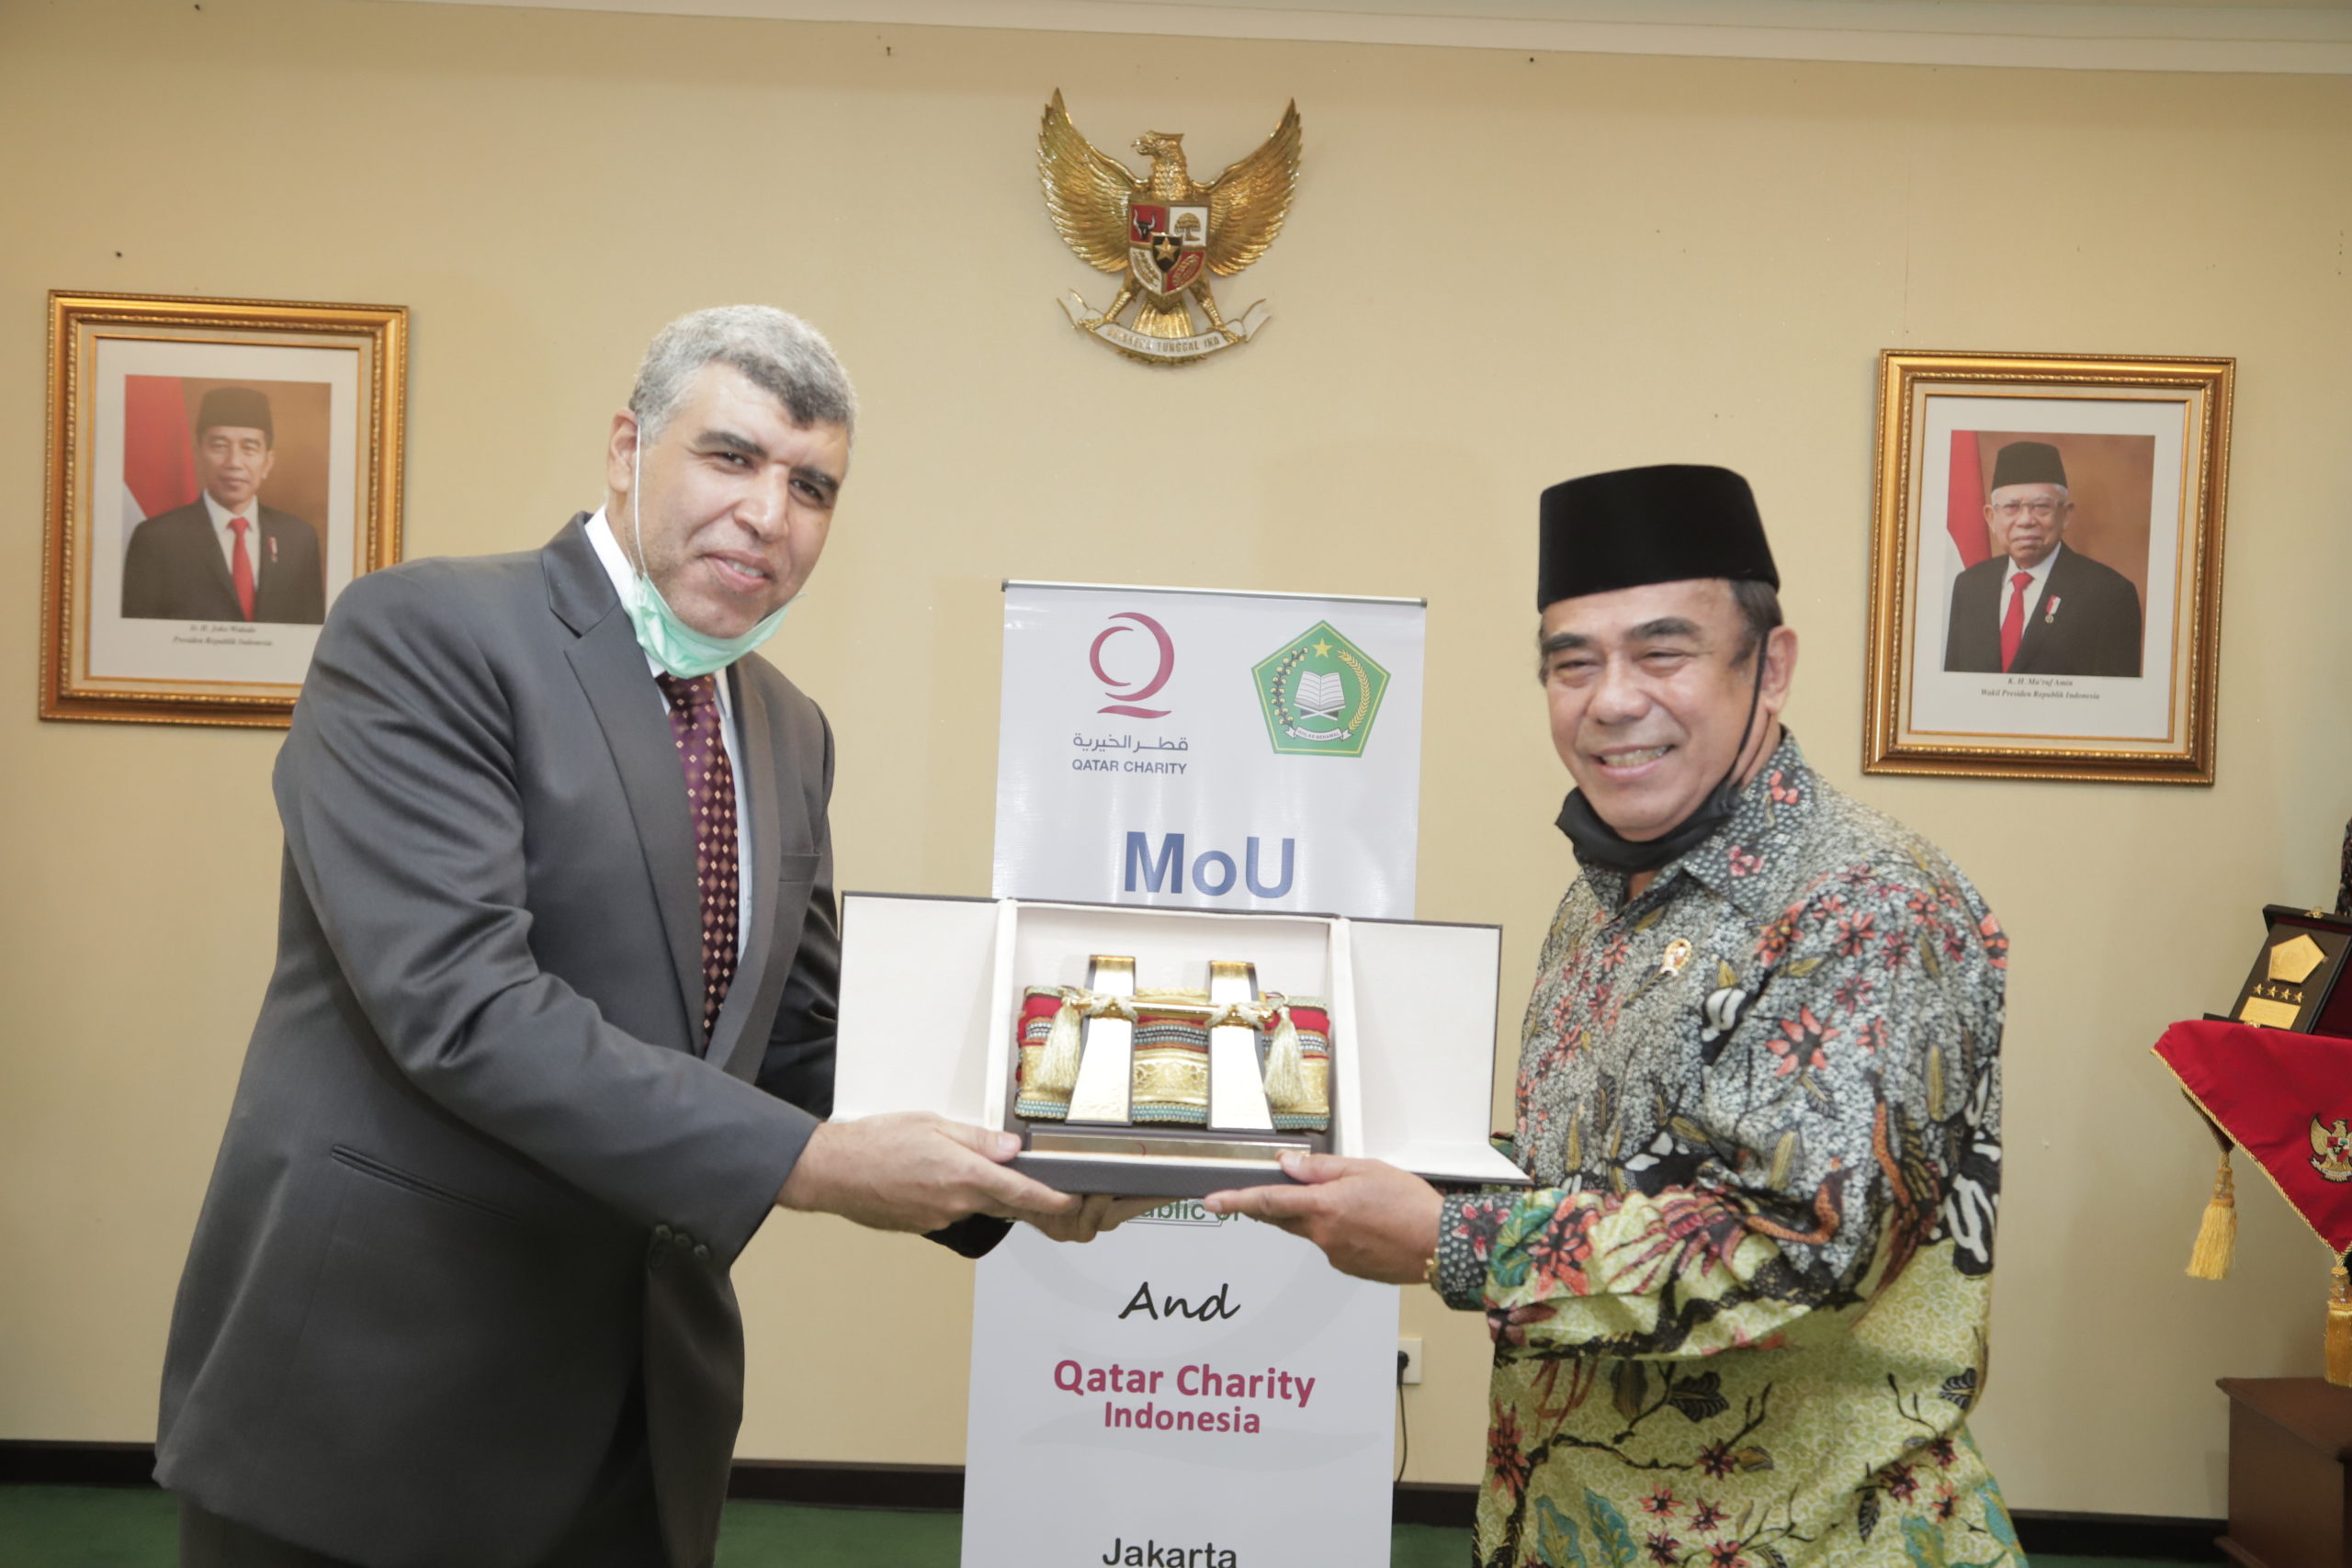 Qatar Charity, Indonesian Ministry continue cooperation worth US$30 million